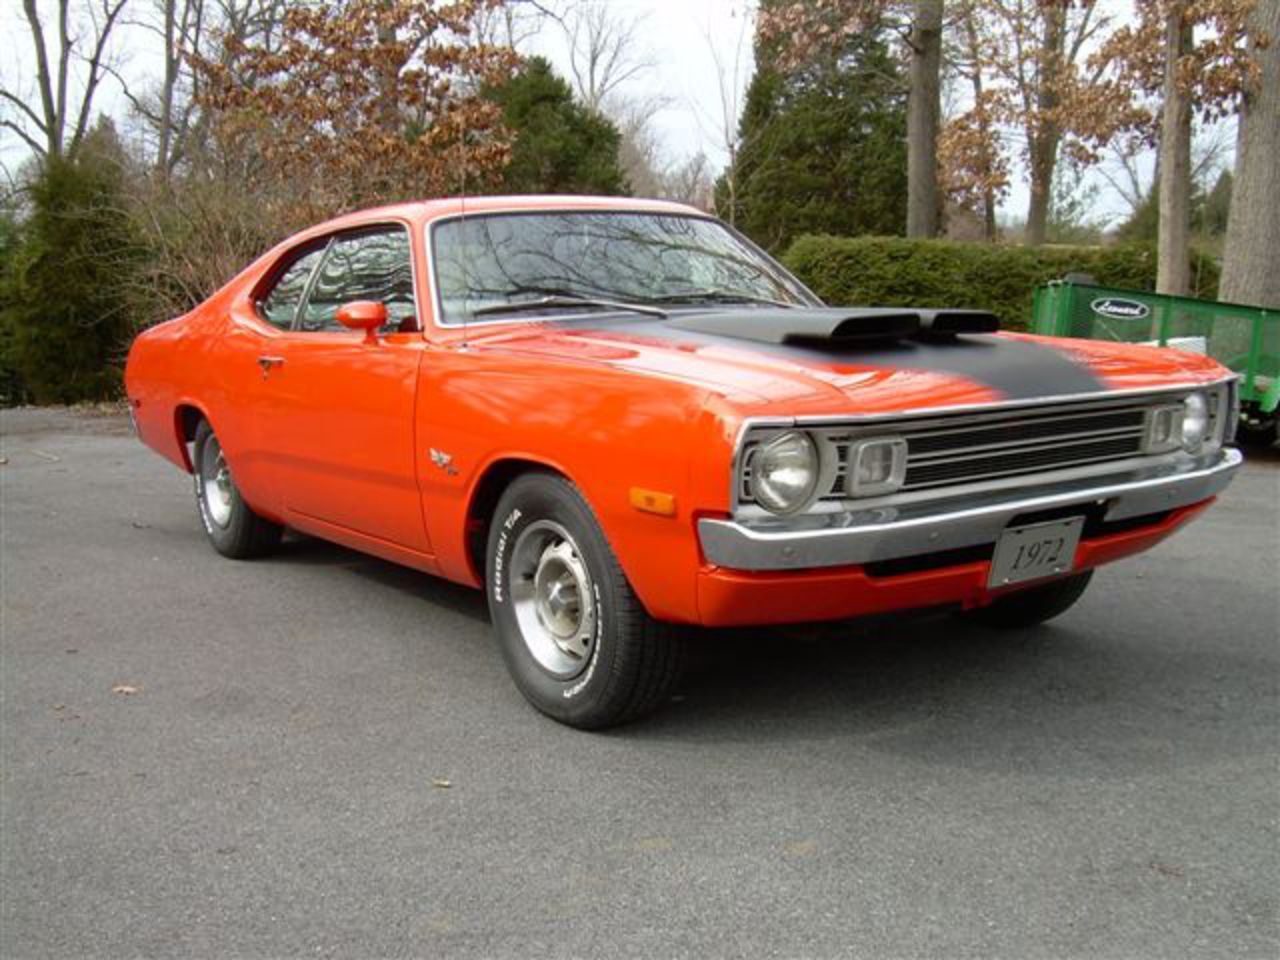 What: '72 Dodge Demon 340. When Gary found this numbers-matching Demon 340 a